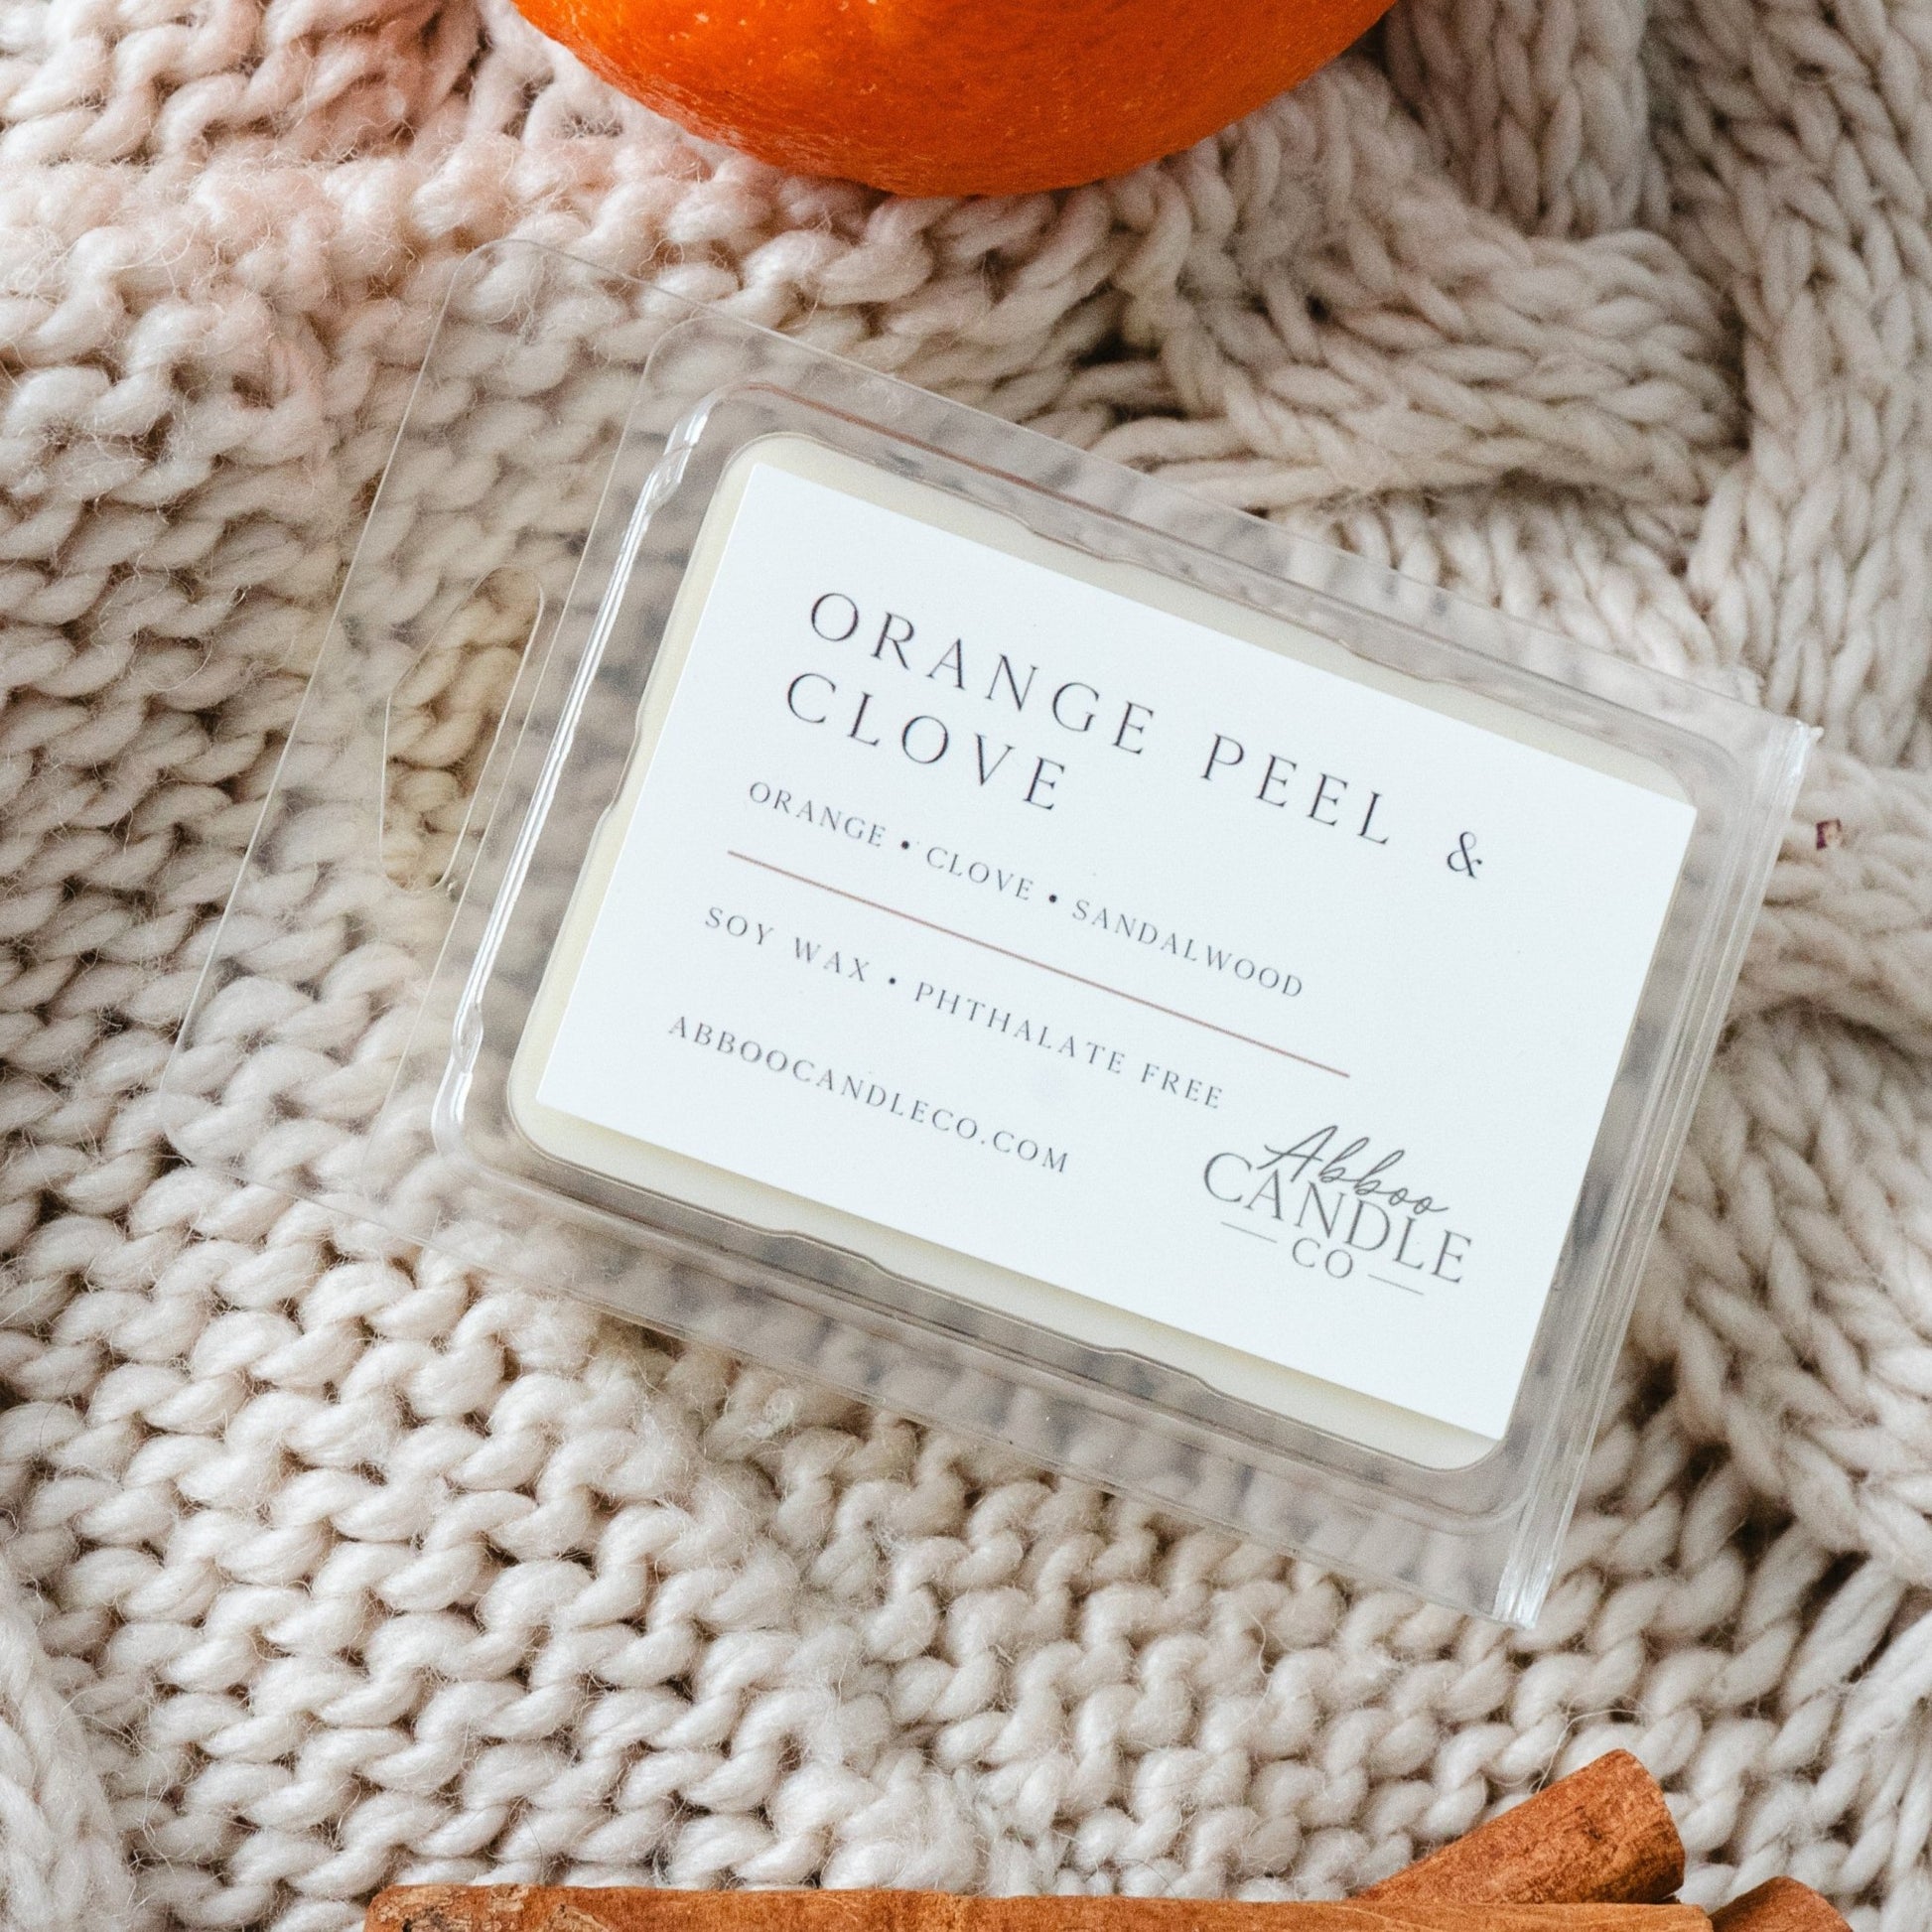 Orange Peel and Clove Soy Wax Melts - Abboo Candle Co